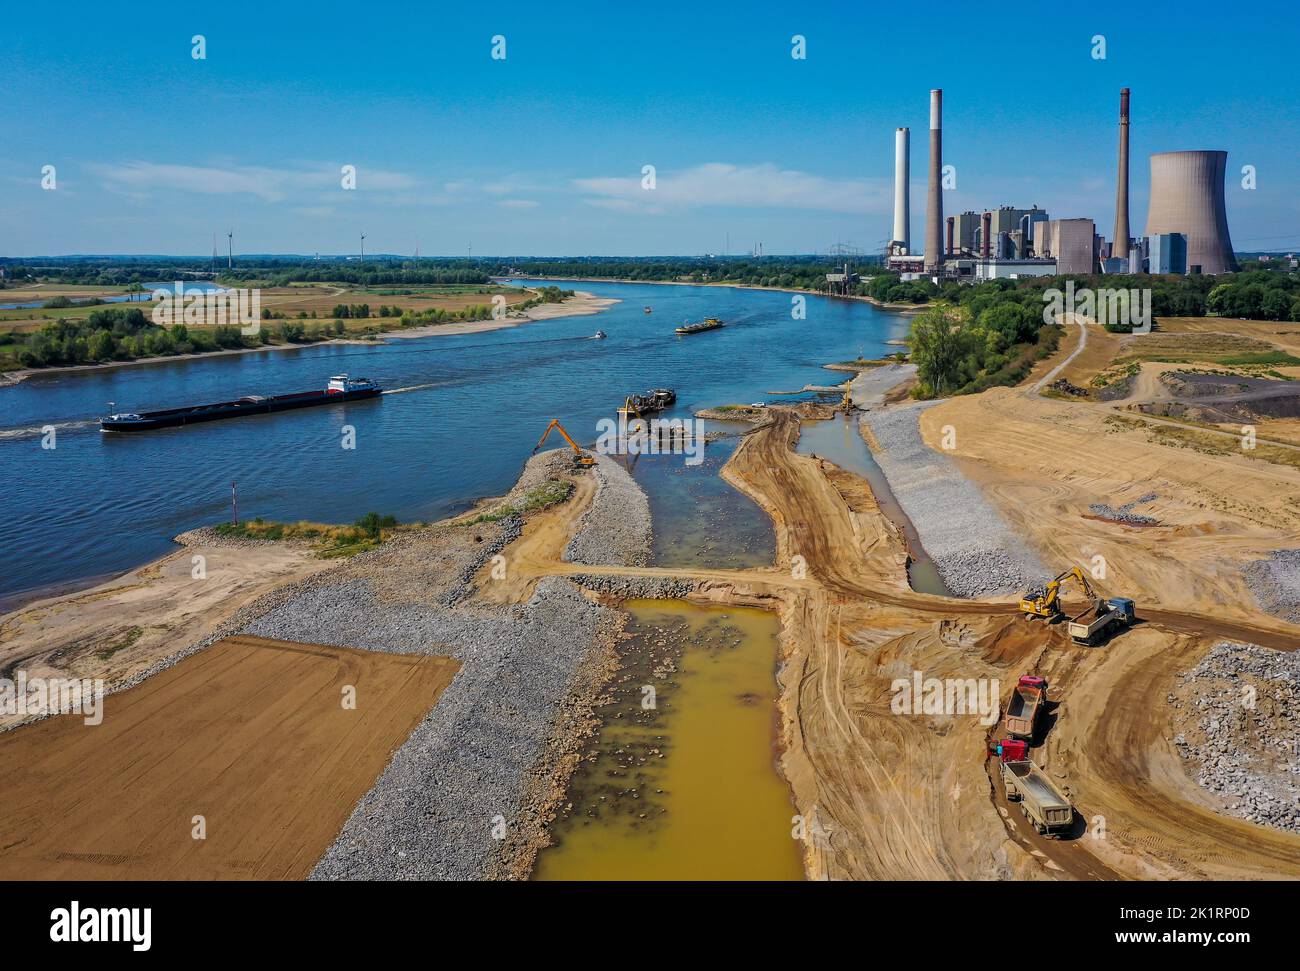 Dinslaken, Voerde, North Rhine-Westphalia, Germany - Emscher estuary into the Rhine. Construction site of the New Emschermouth in front of the decommi Stock Photo